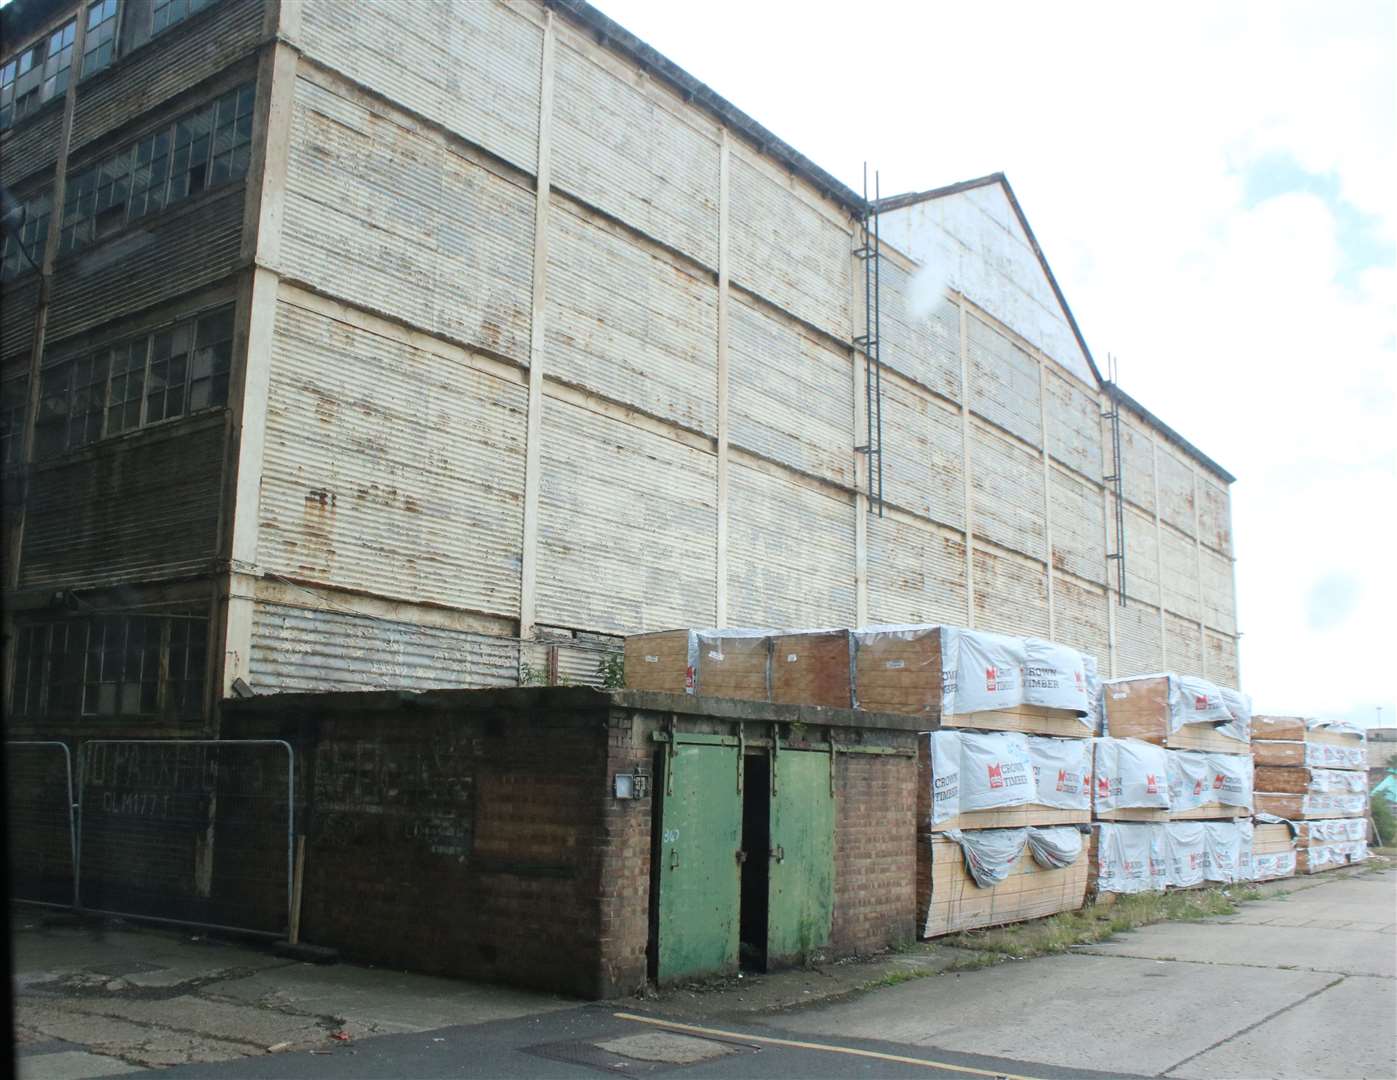 The historic Boat Store in Sheerness Docks. Its cast iron frame was the forerunner of today's skyscrapers. Picture: Clive Holden (55165224)